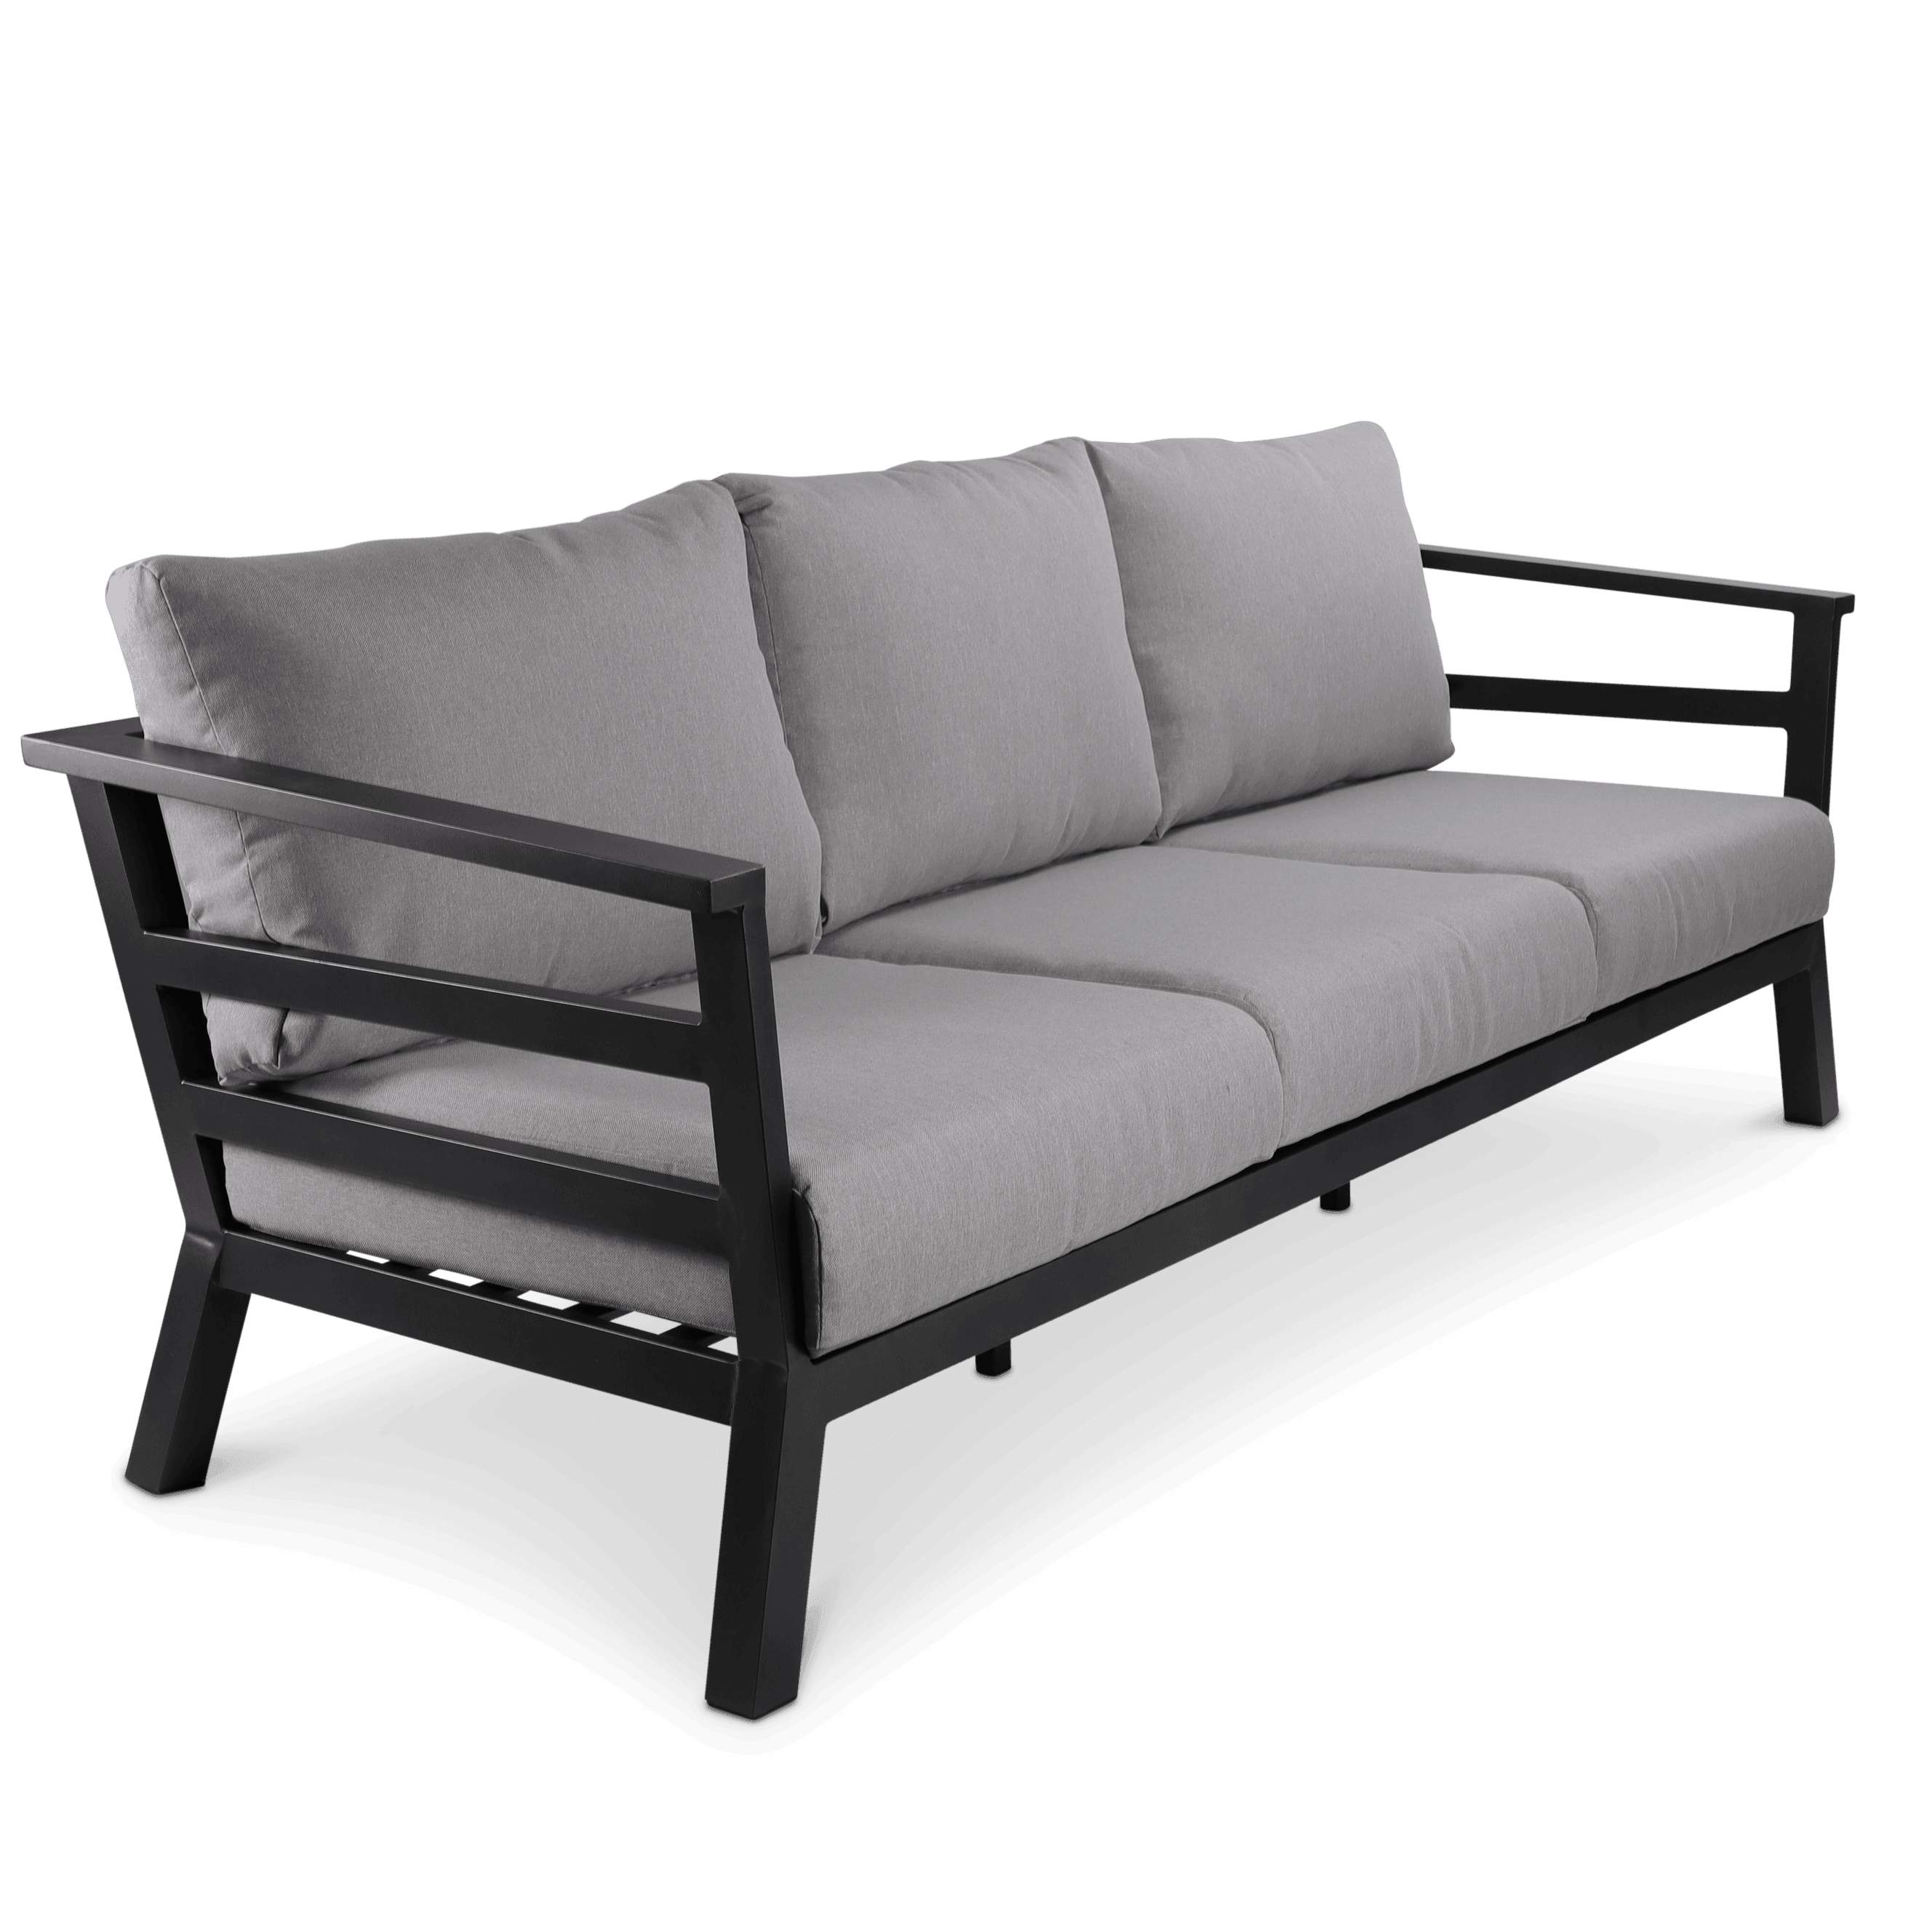 Aveiro 3 Seater with 2x Armchairs and San Sebastian Coffee Table in Gunmetal Grey with Stone Olefin Cushions - The Furniture Shack